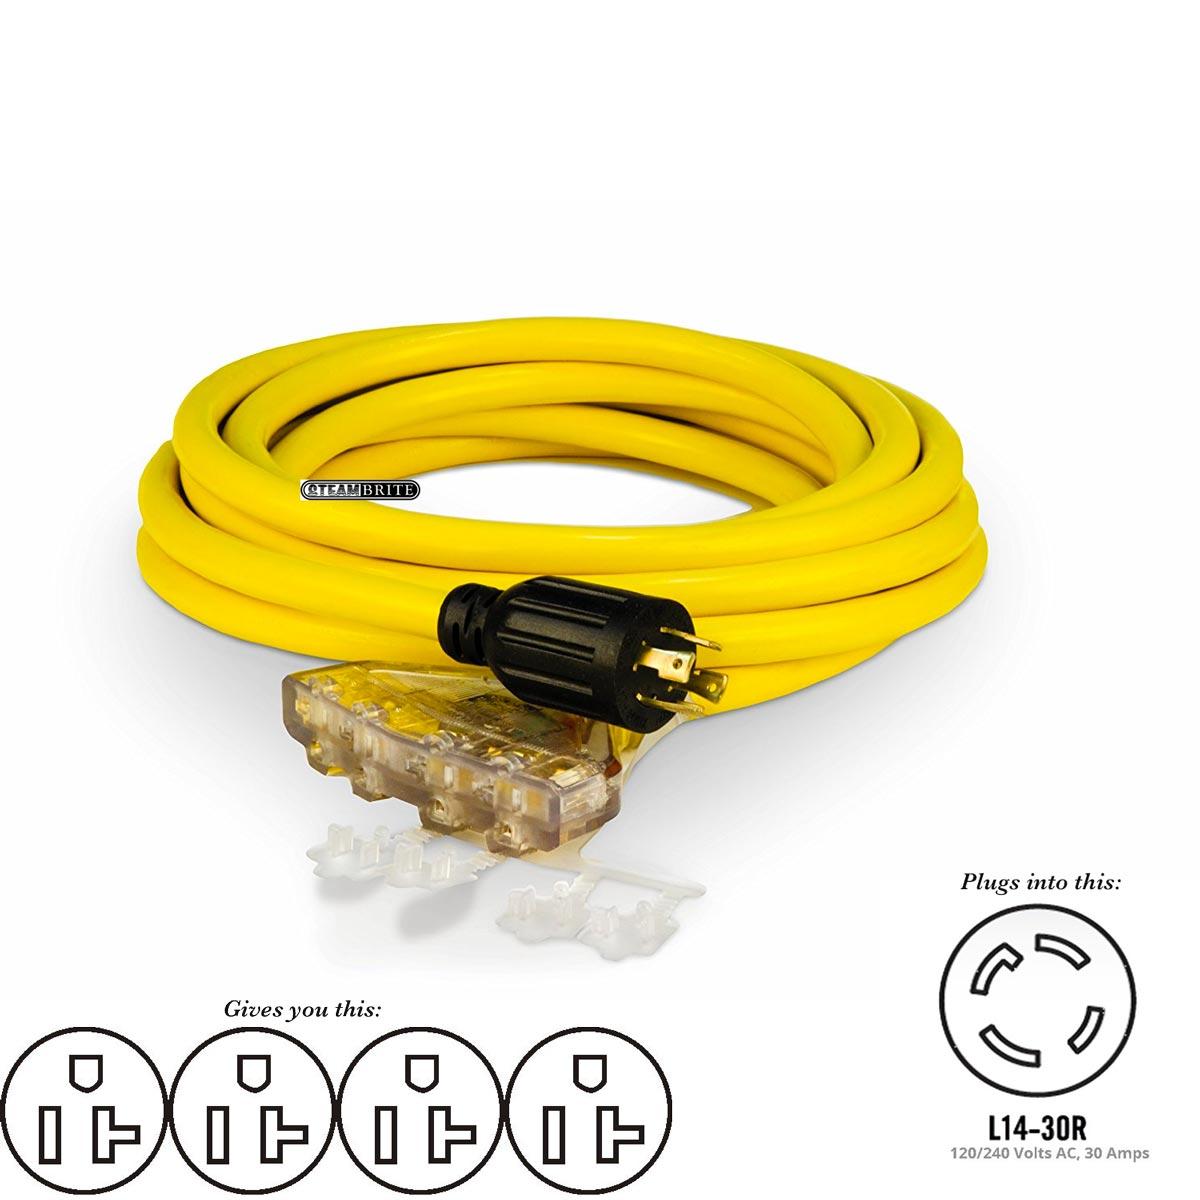 BE Pressure 85.508.003 Champion Power 48036 L14-30P X Four 5-20R Generator 10-3 X 25ft Quad Tap Power Cord Adapter